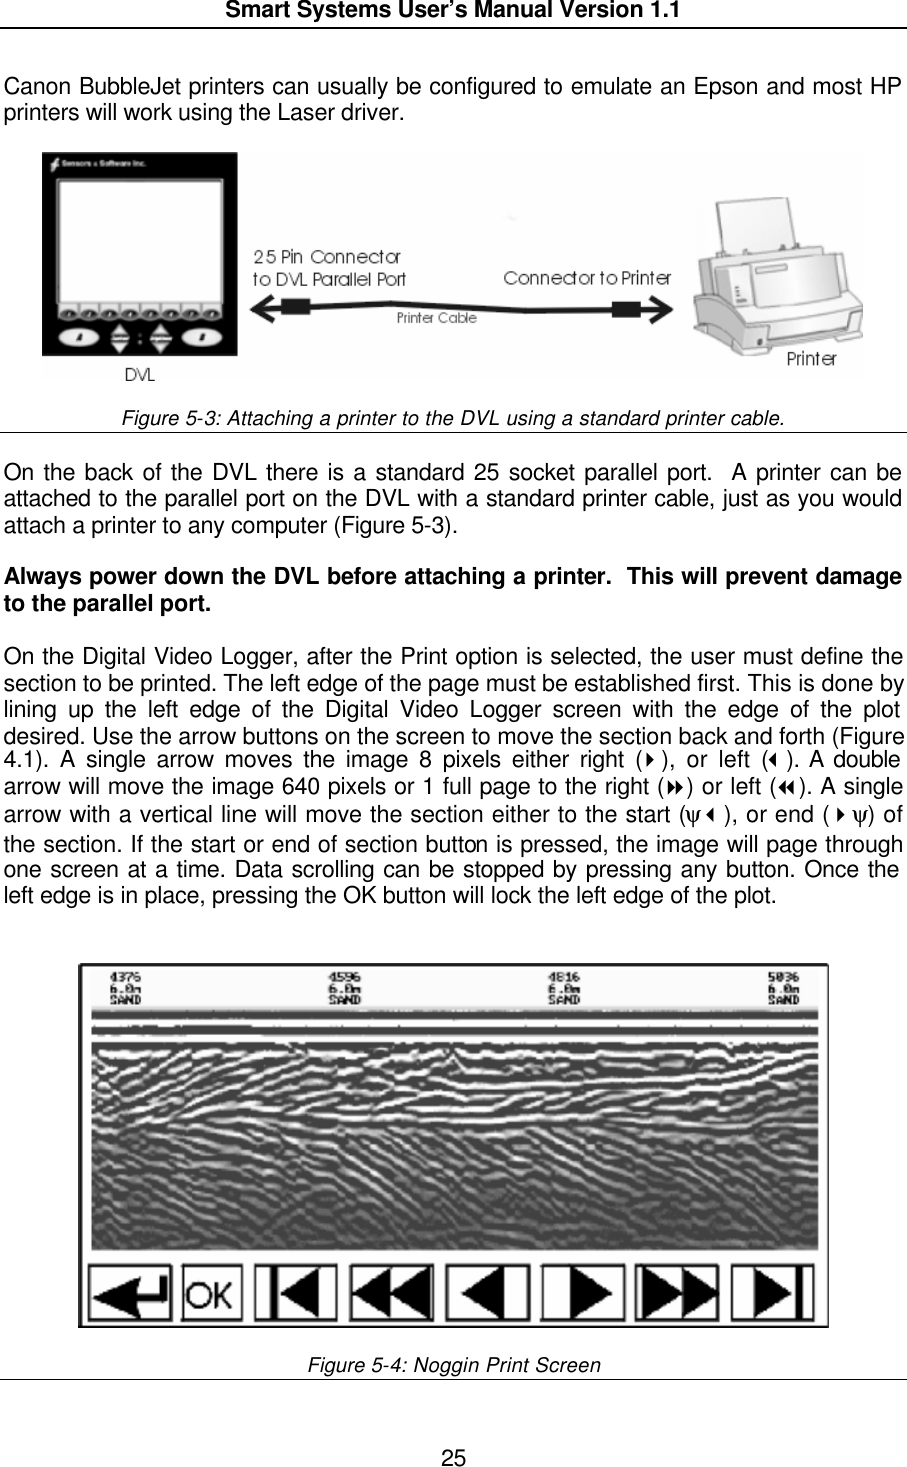  Smart Systems User’s Manual Version 1.1  25  Canon BubbleJet printers can usually be configured to emulate an Epson and most HP printers will work using the Laser driver.      Figure 5-3: Attaching a printer to the DVL using a standard printer cable.  On the back of the DVL there is a standard 25 socket parallel port.  A printer can be attached to the parallel port on the DVL with a standard printer cable, just as you would attach a printer to any computer (Figure 5-3).  Always power down the DVL before attaching a printer.  This will prevent damage to the parallel port.  On the Digital Video Logger, after the Print option is selected, the user must define the section to be printed. The left edge of the page must be established first. This is done by lining up the left edge of the Digital Video Logger screen with the edge of the plot desired. Use the arrow buttons on the screen to move the section back and forth (Figure 4.1). A single arrow moves the image 8 pixels either right (4), or left (3). A double arrow will move the image 640 pixels or 1 full page to the right (8) or left (7). A single arrow with a vertical line will move the section either to the start (ψ3), or end (4ψ) of the section. If the start or end of section button is pressed, the image will page through one screen at a time. Data scrolling can be stopped by pressing any button. Once the left edge is in place, pressing the OK button will lock the left edge of the plot.     Figure 5-4: Noggin Print Screen  